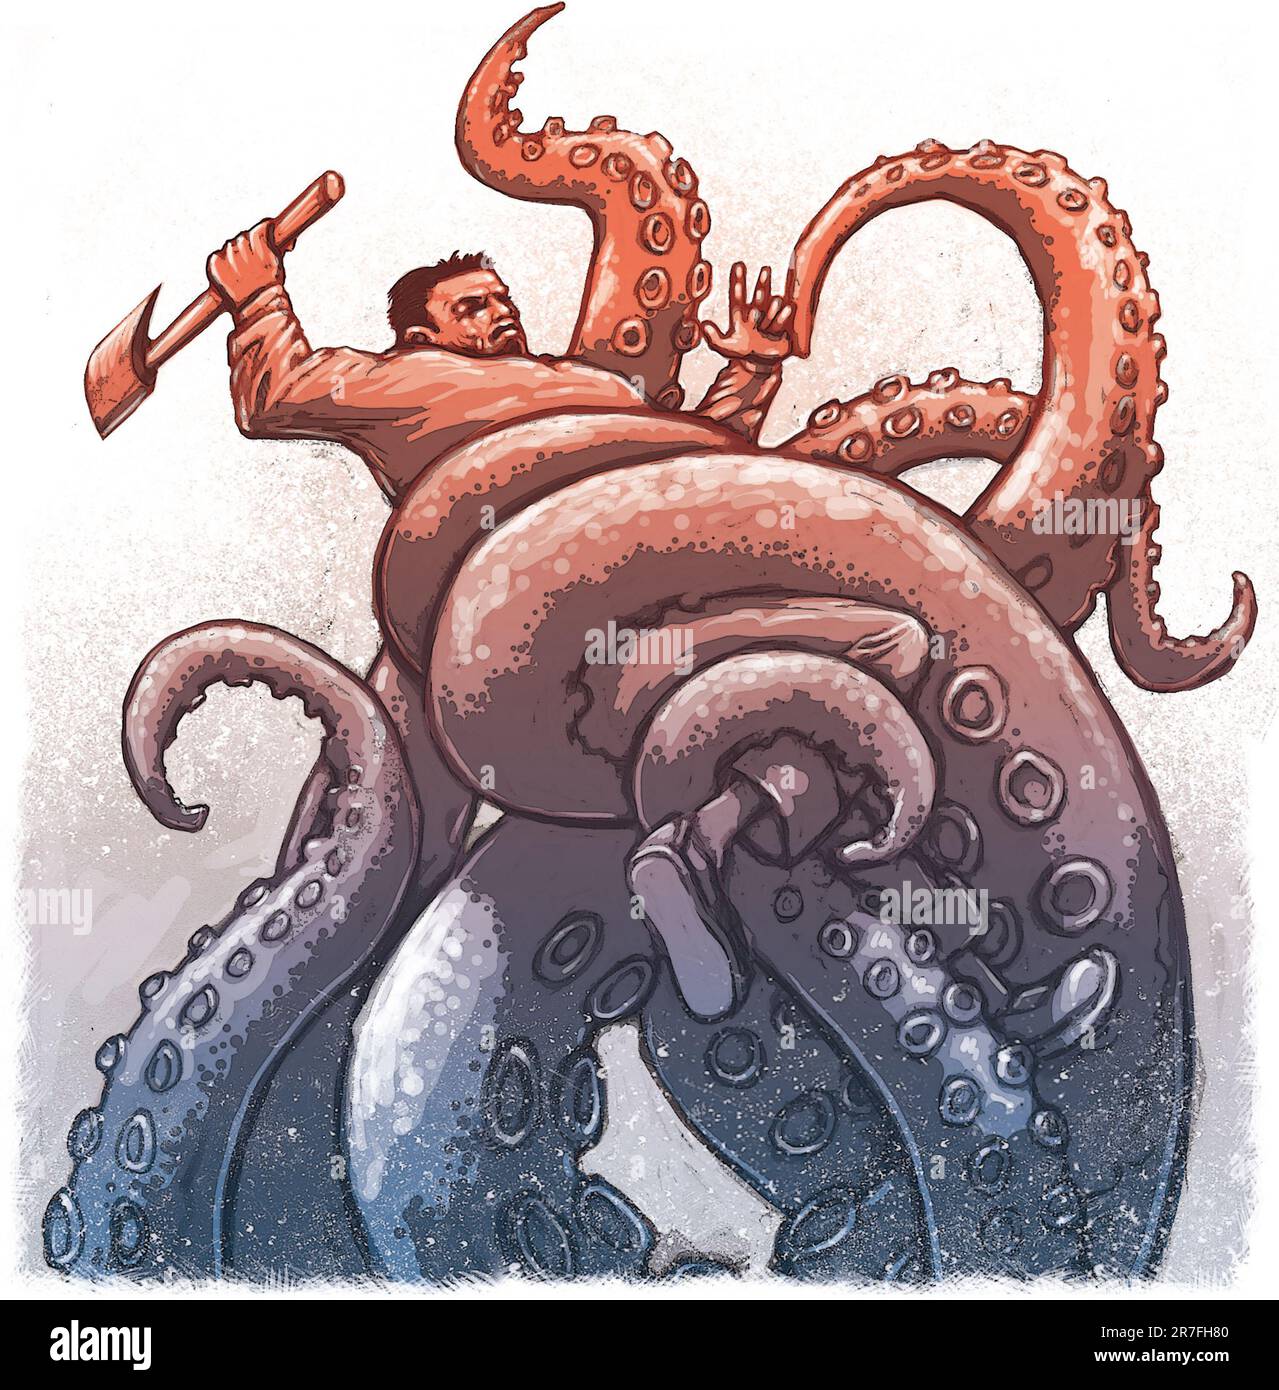 Art of man with axe, wrapped in tentacles of giant octopus, inspired by Jules Verne's Twenty Thousand Leagues Under the Seas, sci-fi, adventure book. Stock Photo